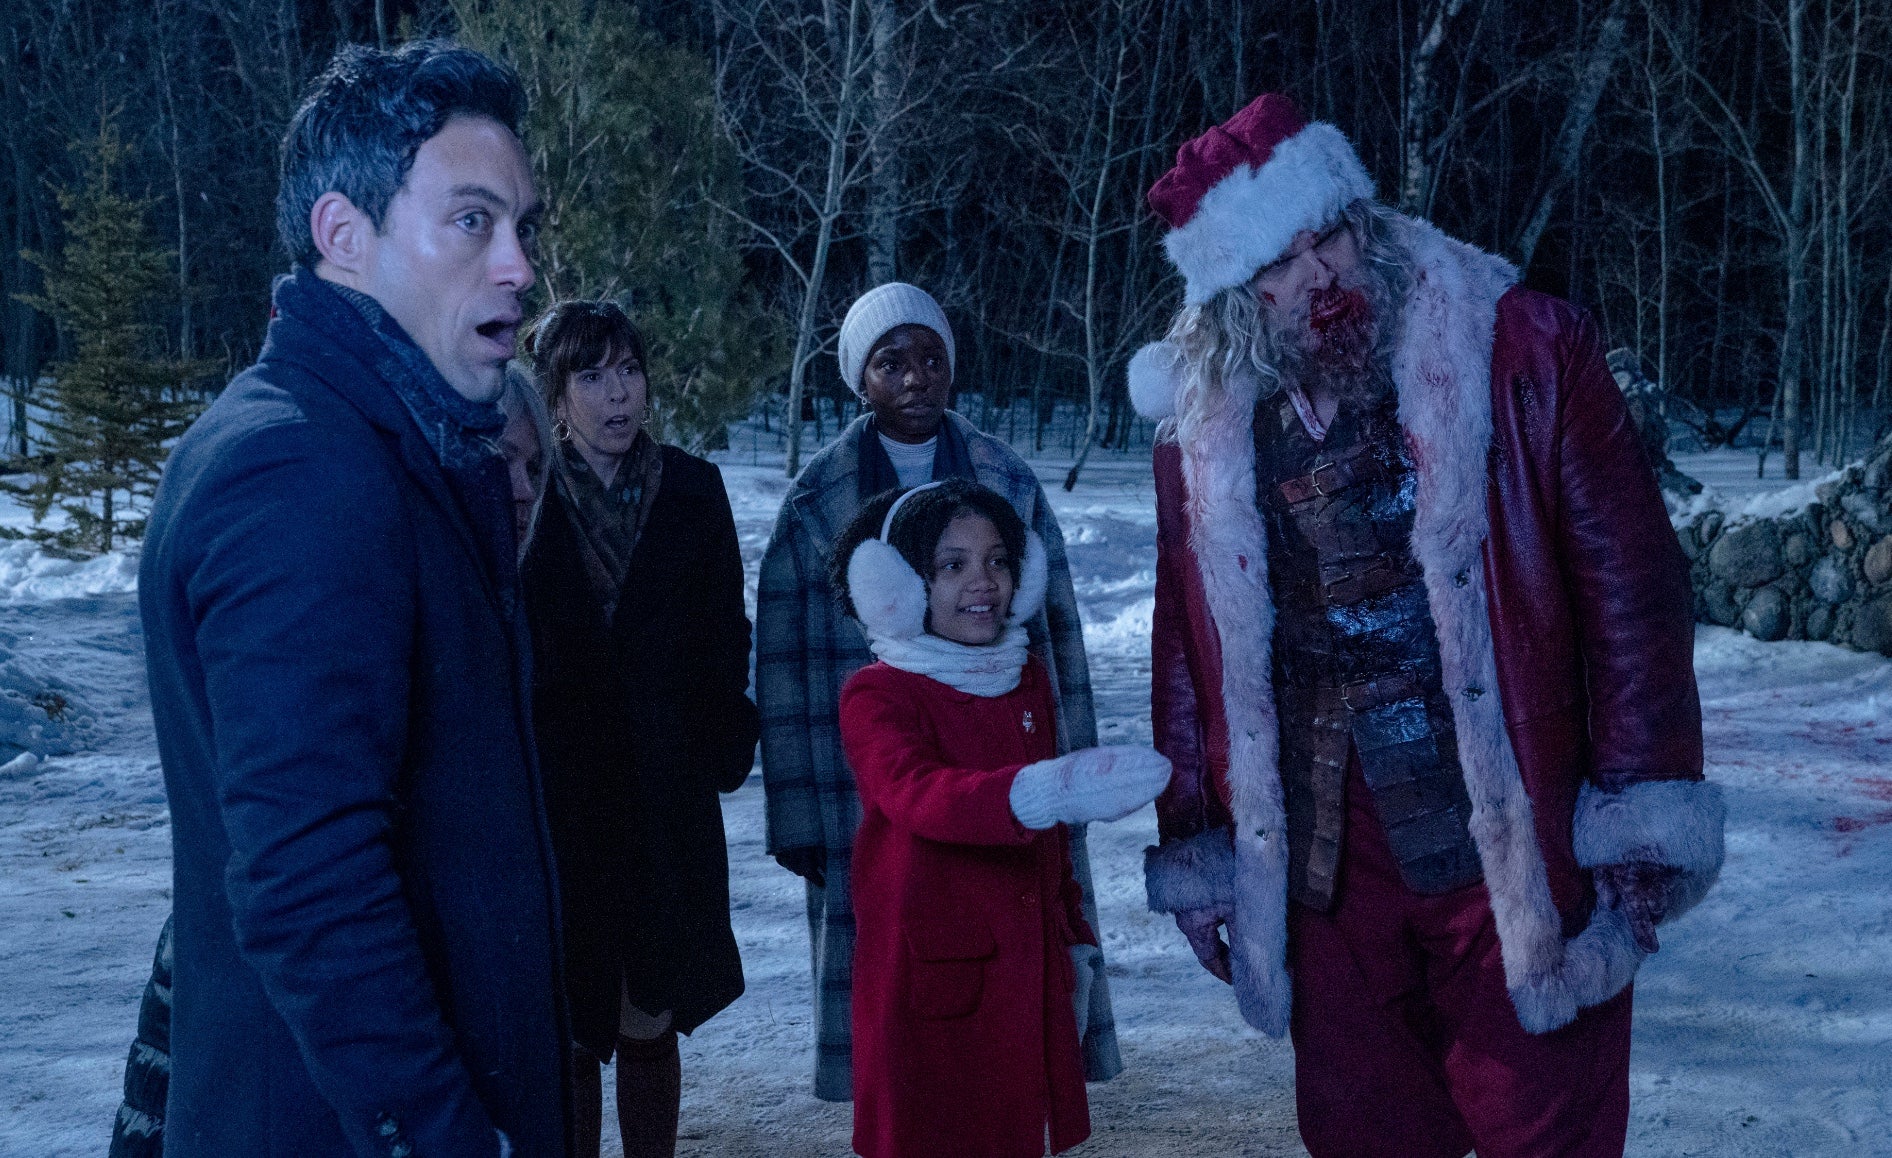 Santa and the family. (Image: Universal Pictures)